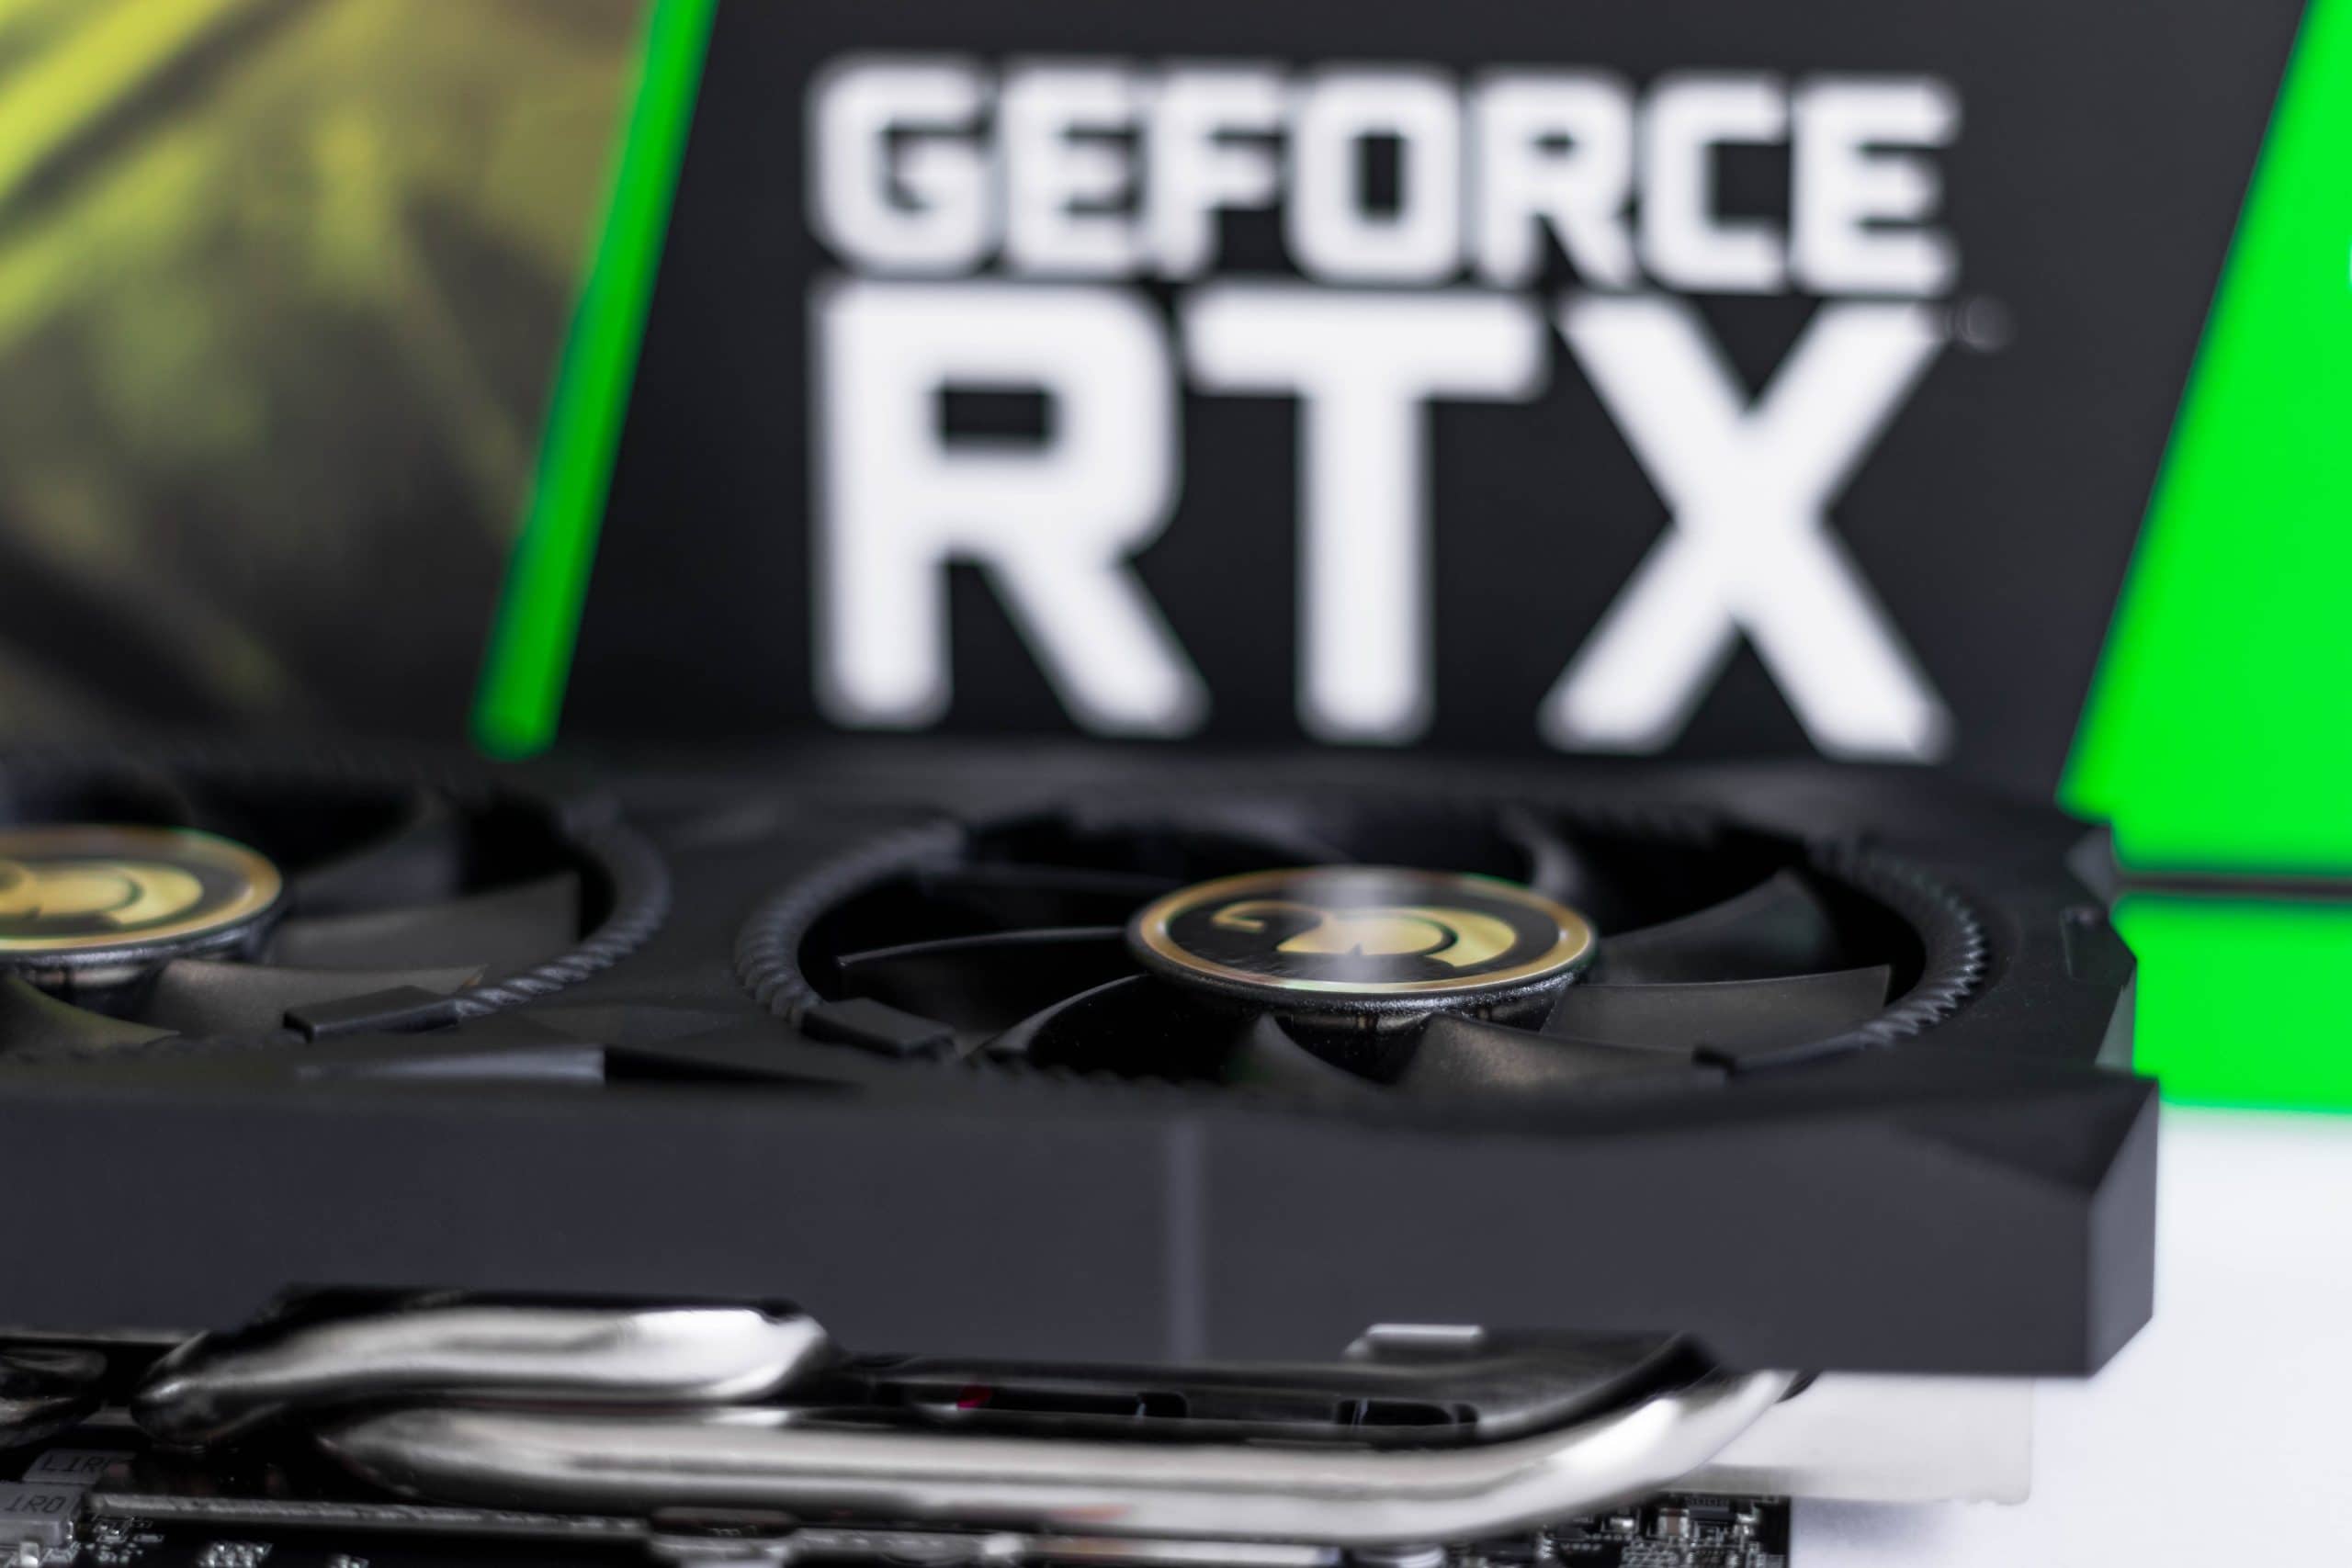 Why Nvidia and AMD are struggling to sell their new GPUs